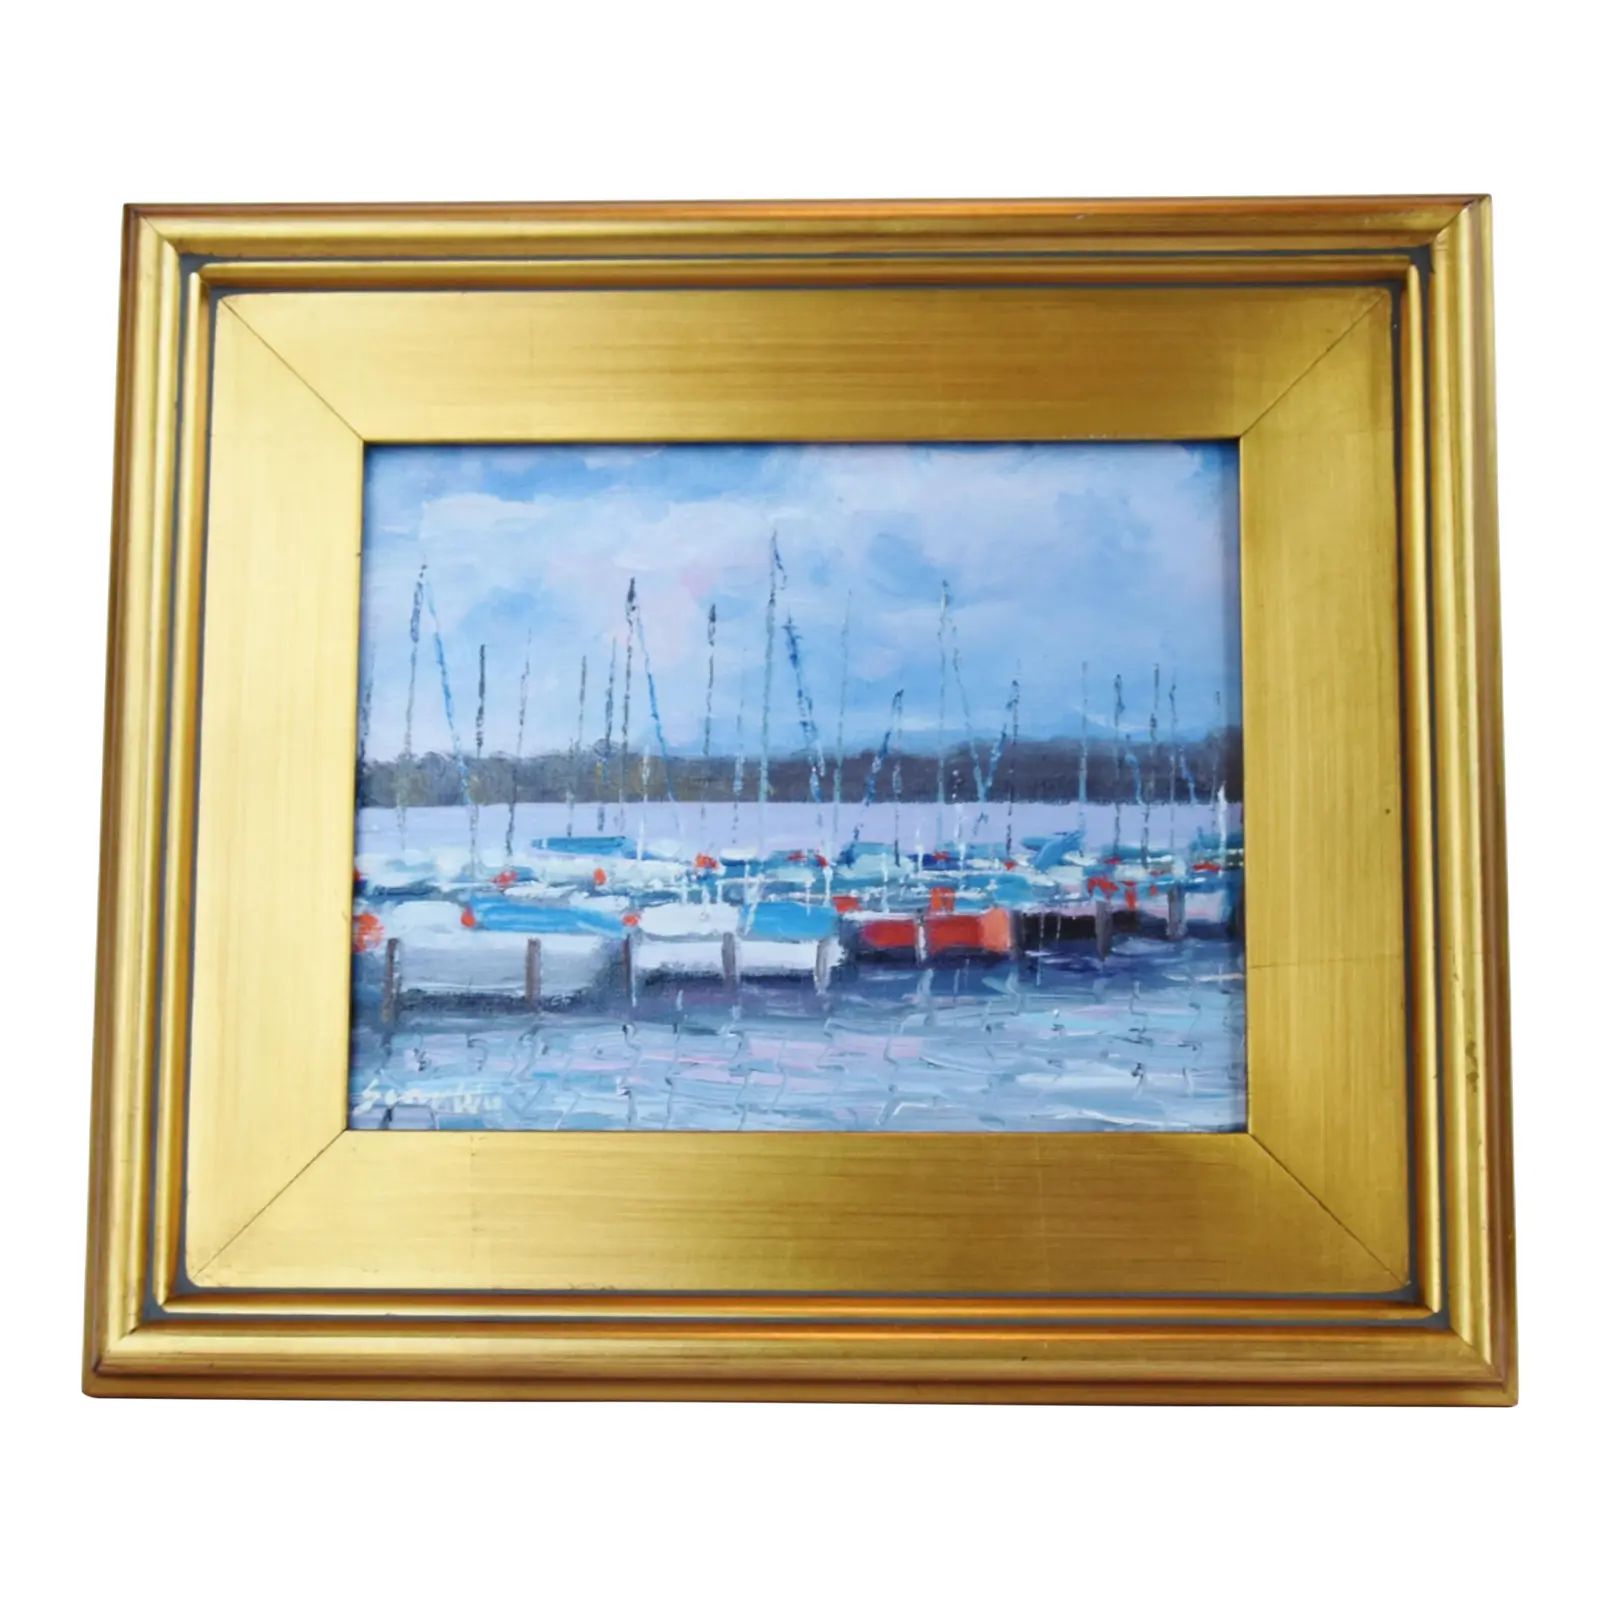 Nautical Coastal Artist Signed Sailboats in Harbor Painting W/ Gold Frame | Chairish